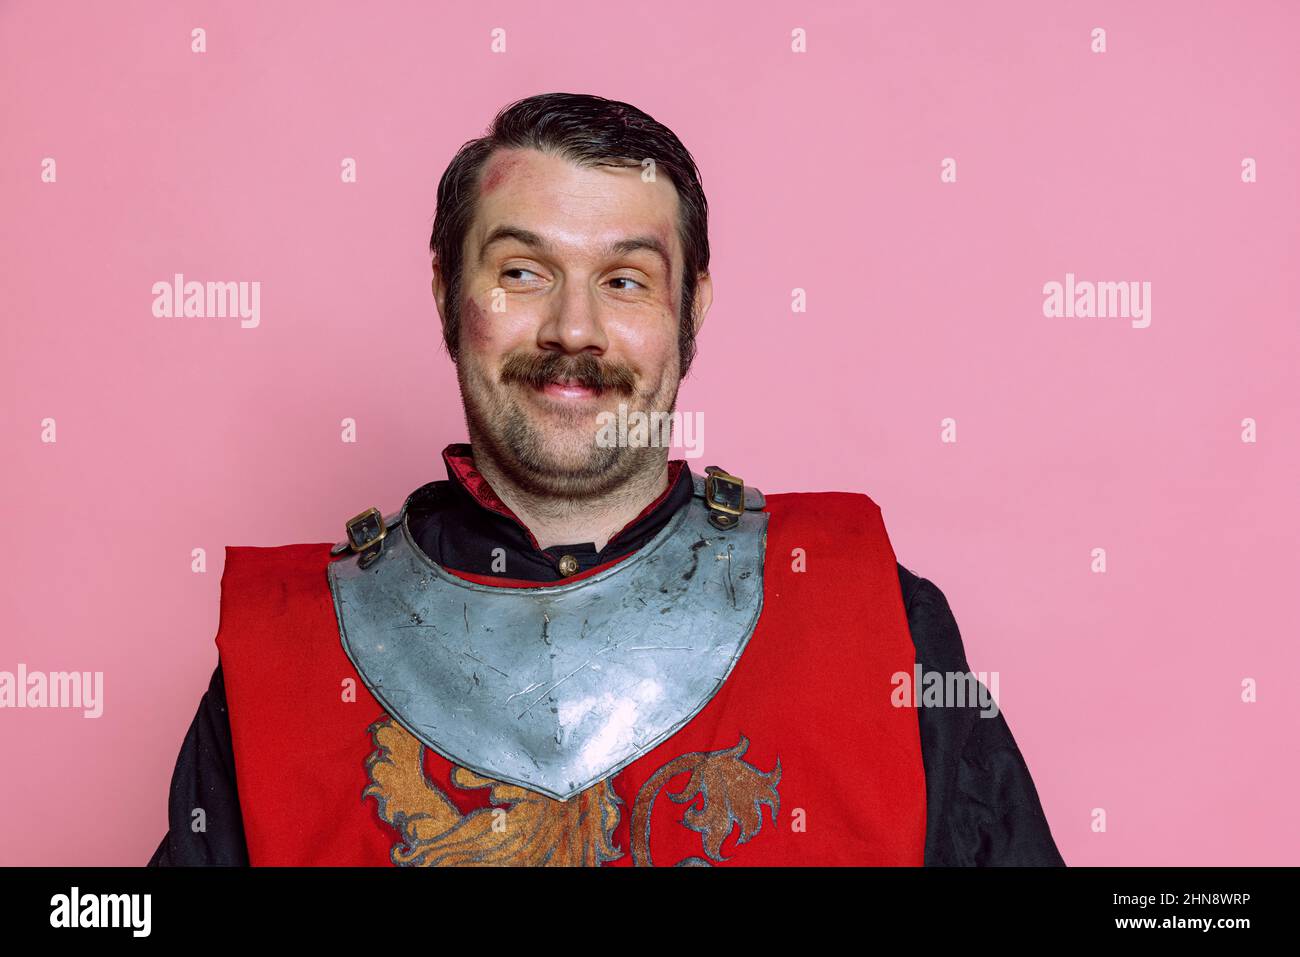 One young man, medieval warrior or knight wearing wearing armor clothing posing isolated over pink background. Comparison of eras, history, emotions Stock Photo